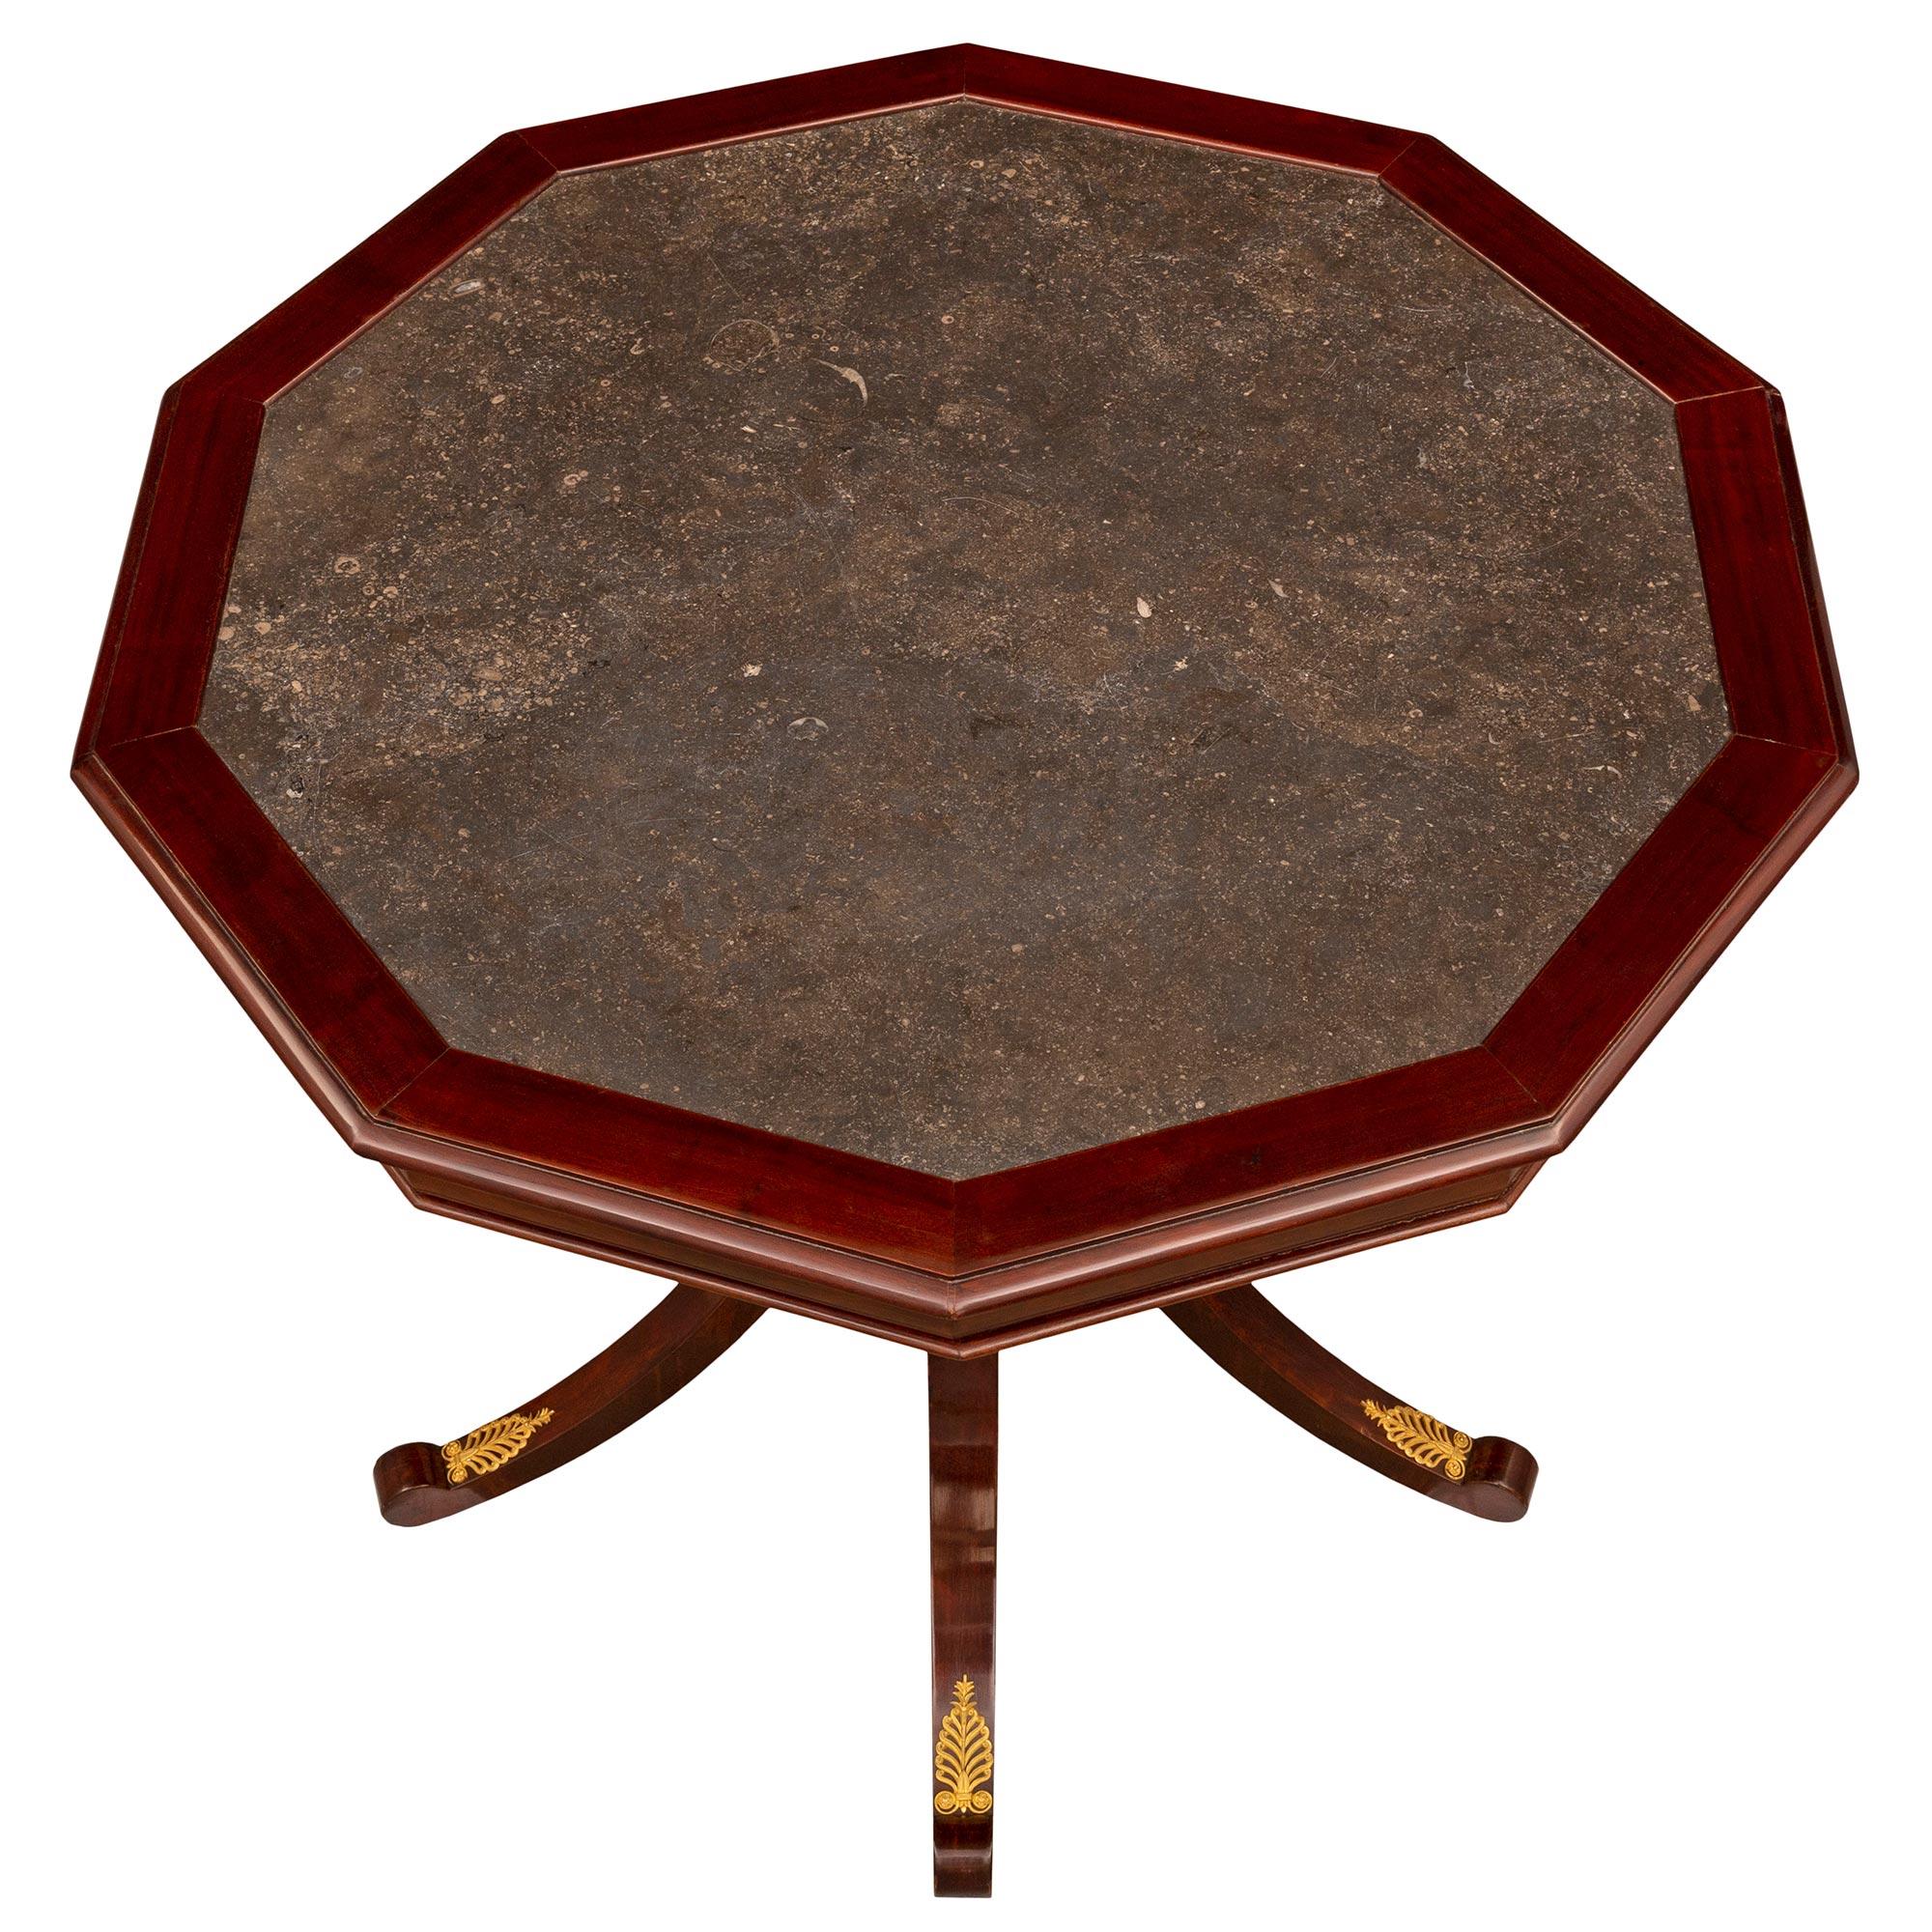 An impressive Italian 19th century Neo-Classical st. Mahogany, ormolu, and fossilized black marble center table. The table is raised by five elegantly curved legs adorned with beautiful pierced ormolu palmettes and richly chased acanthus leaves in a